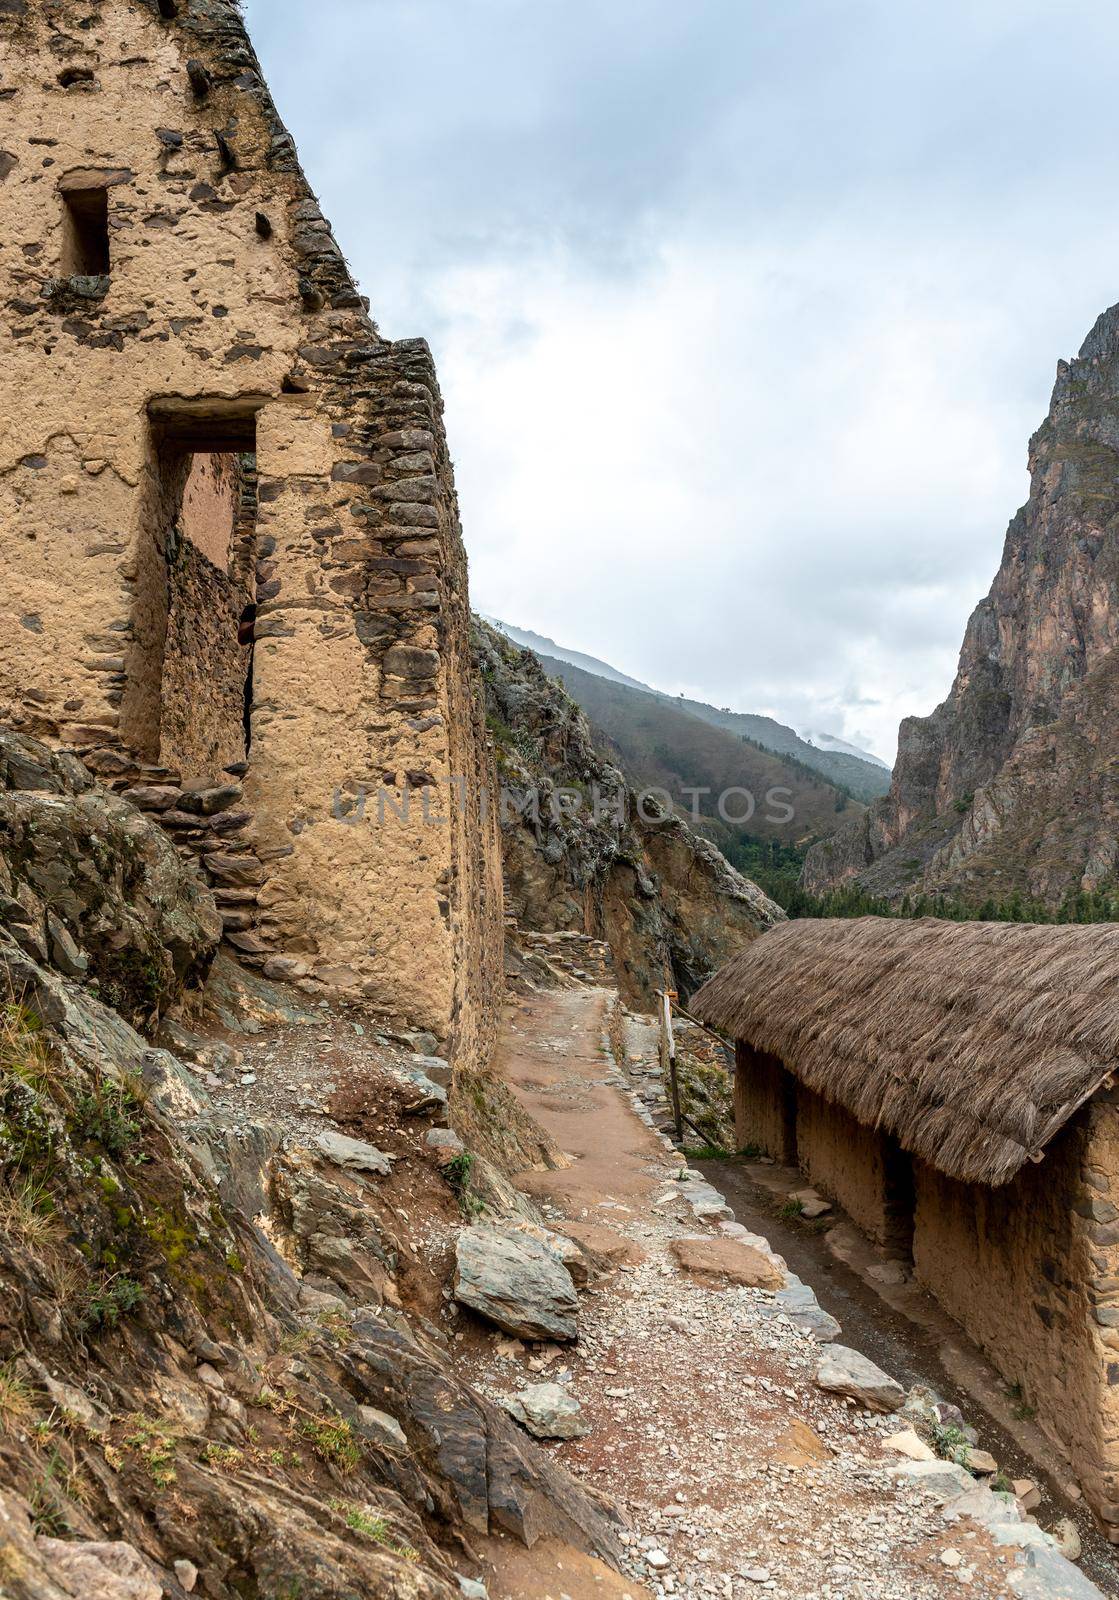 Old small house made of cobblestone at the hill of mountain in Ollantaytambo, Peru